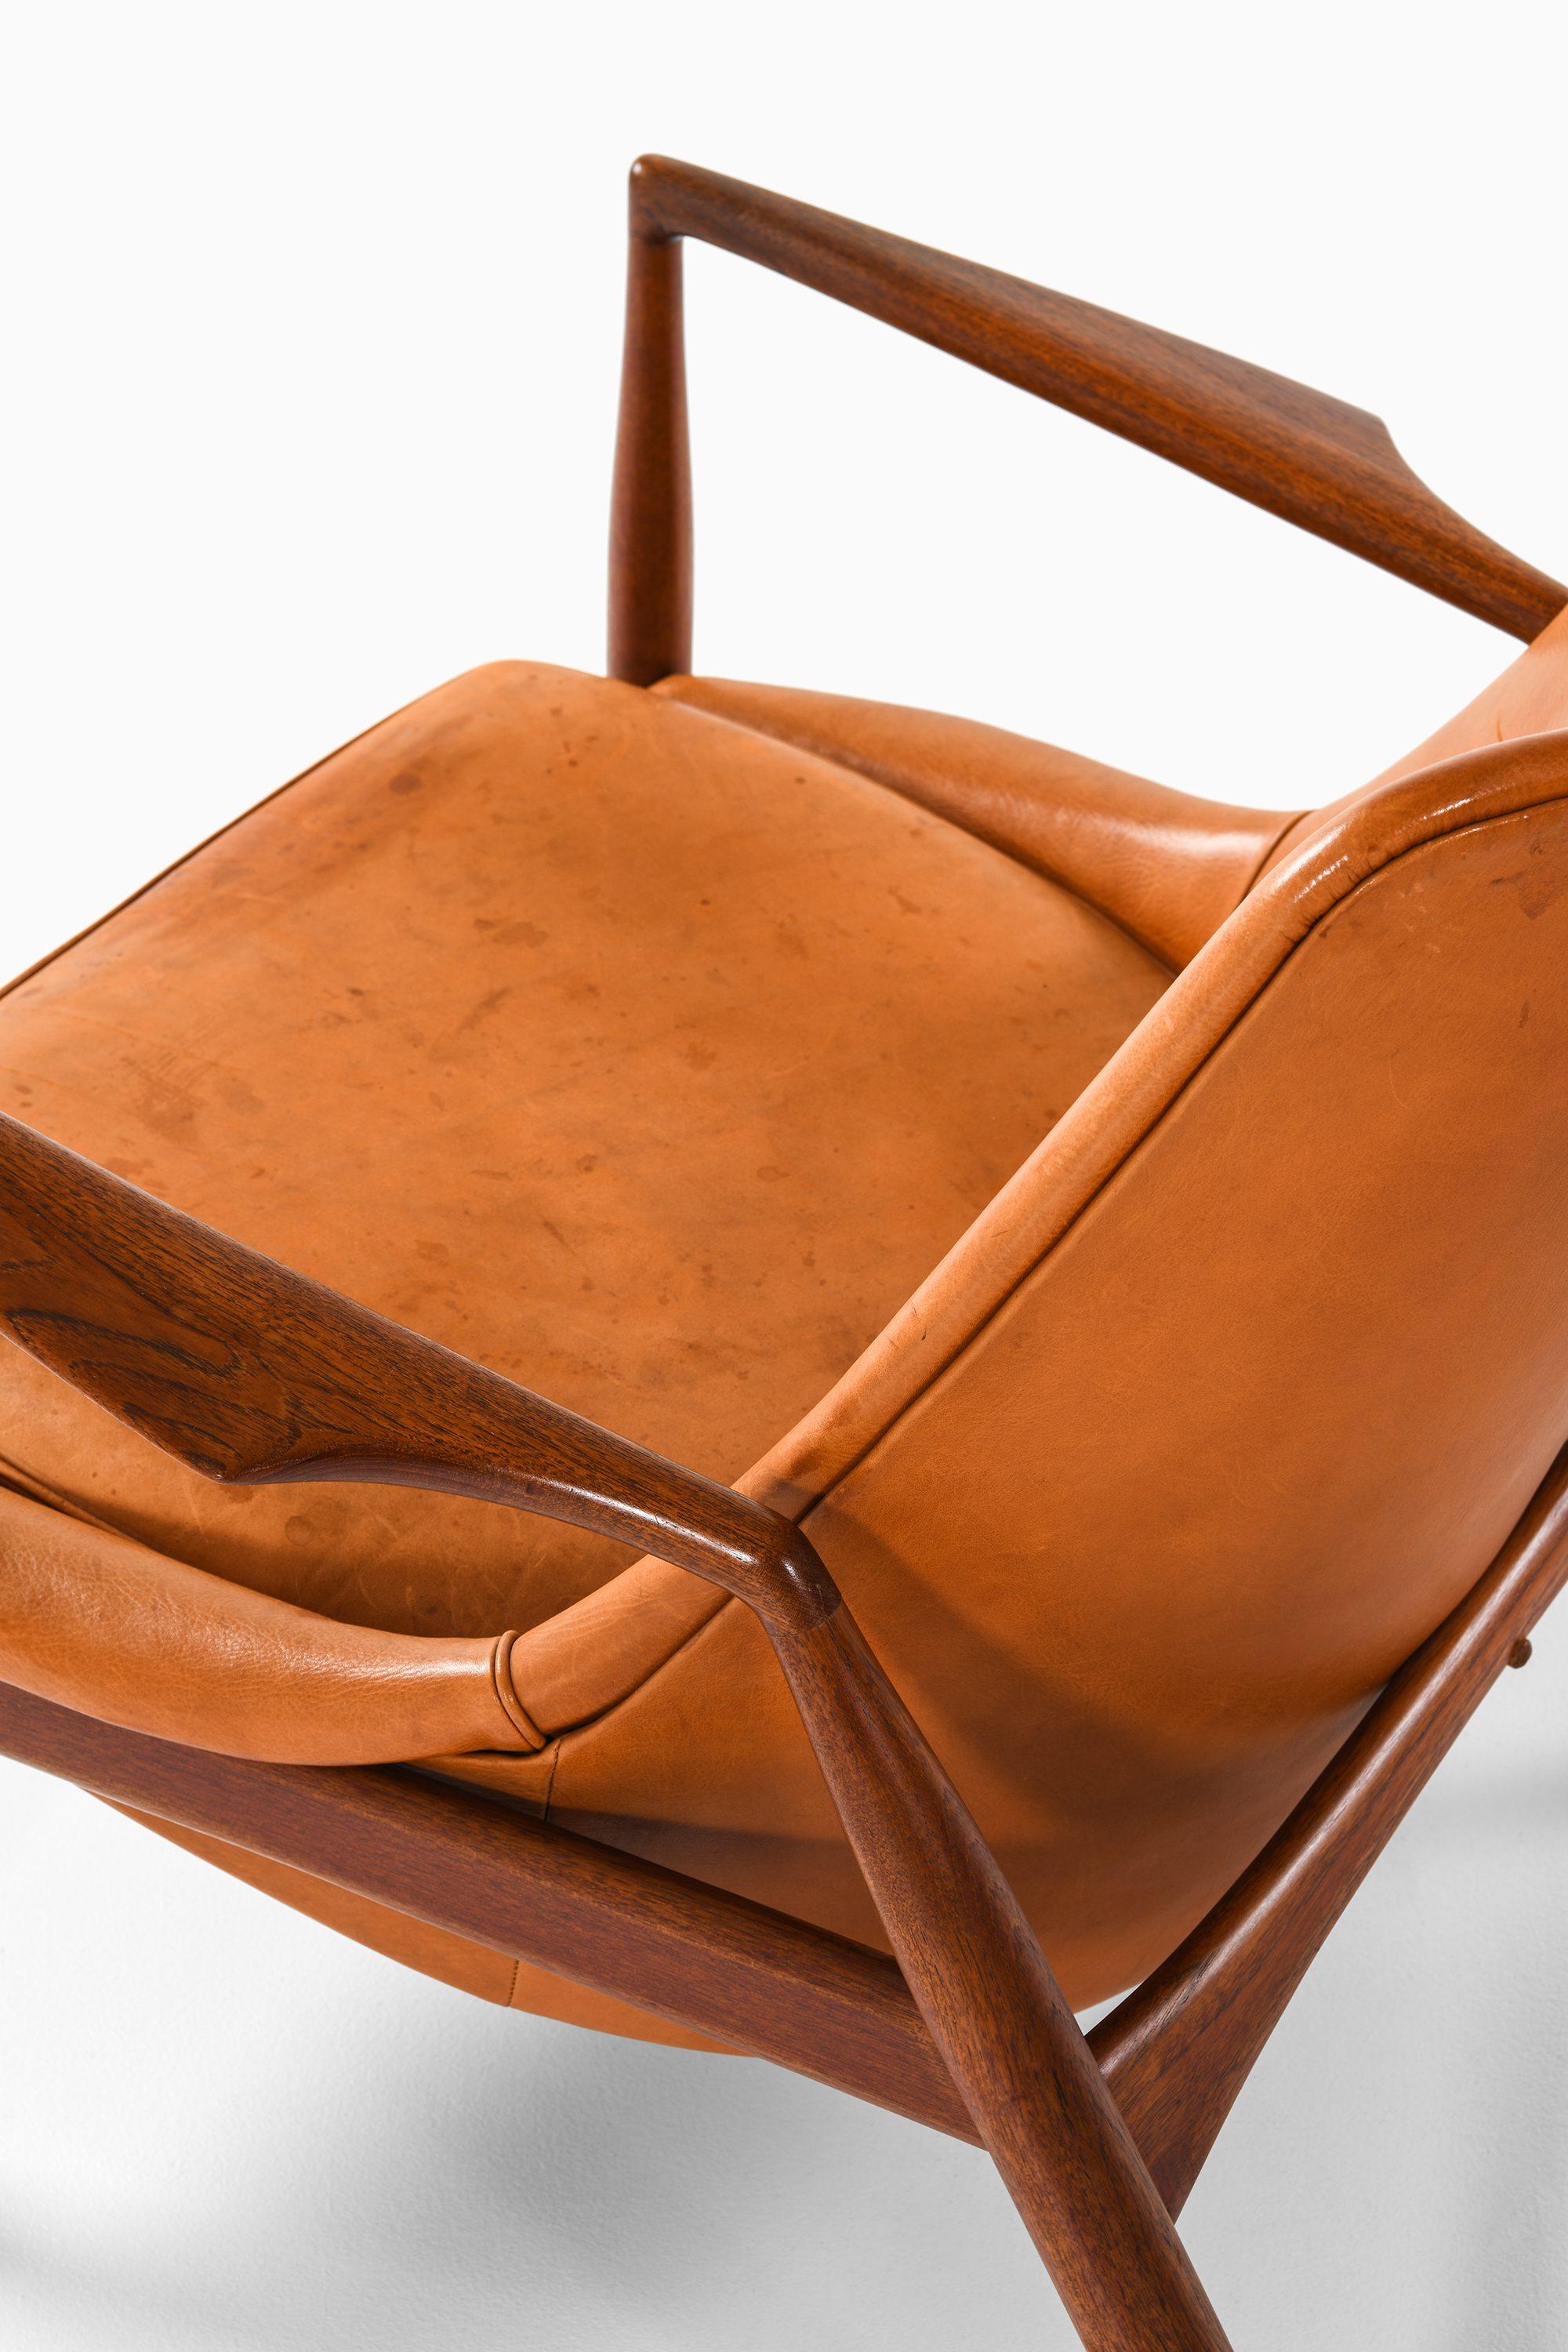 Pair of Easy Chairs in Teak and Leather by Ib Kofod-Larsen, 1950s For Sale 5